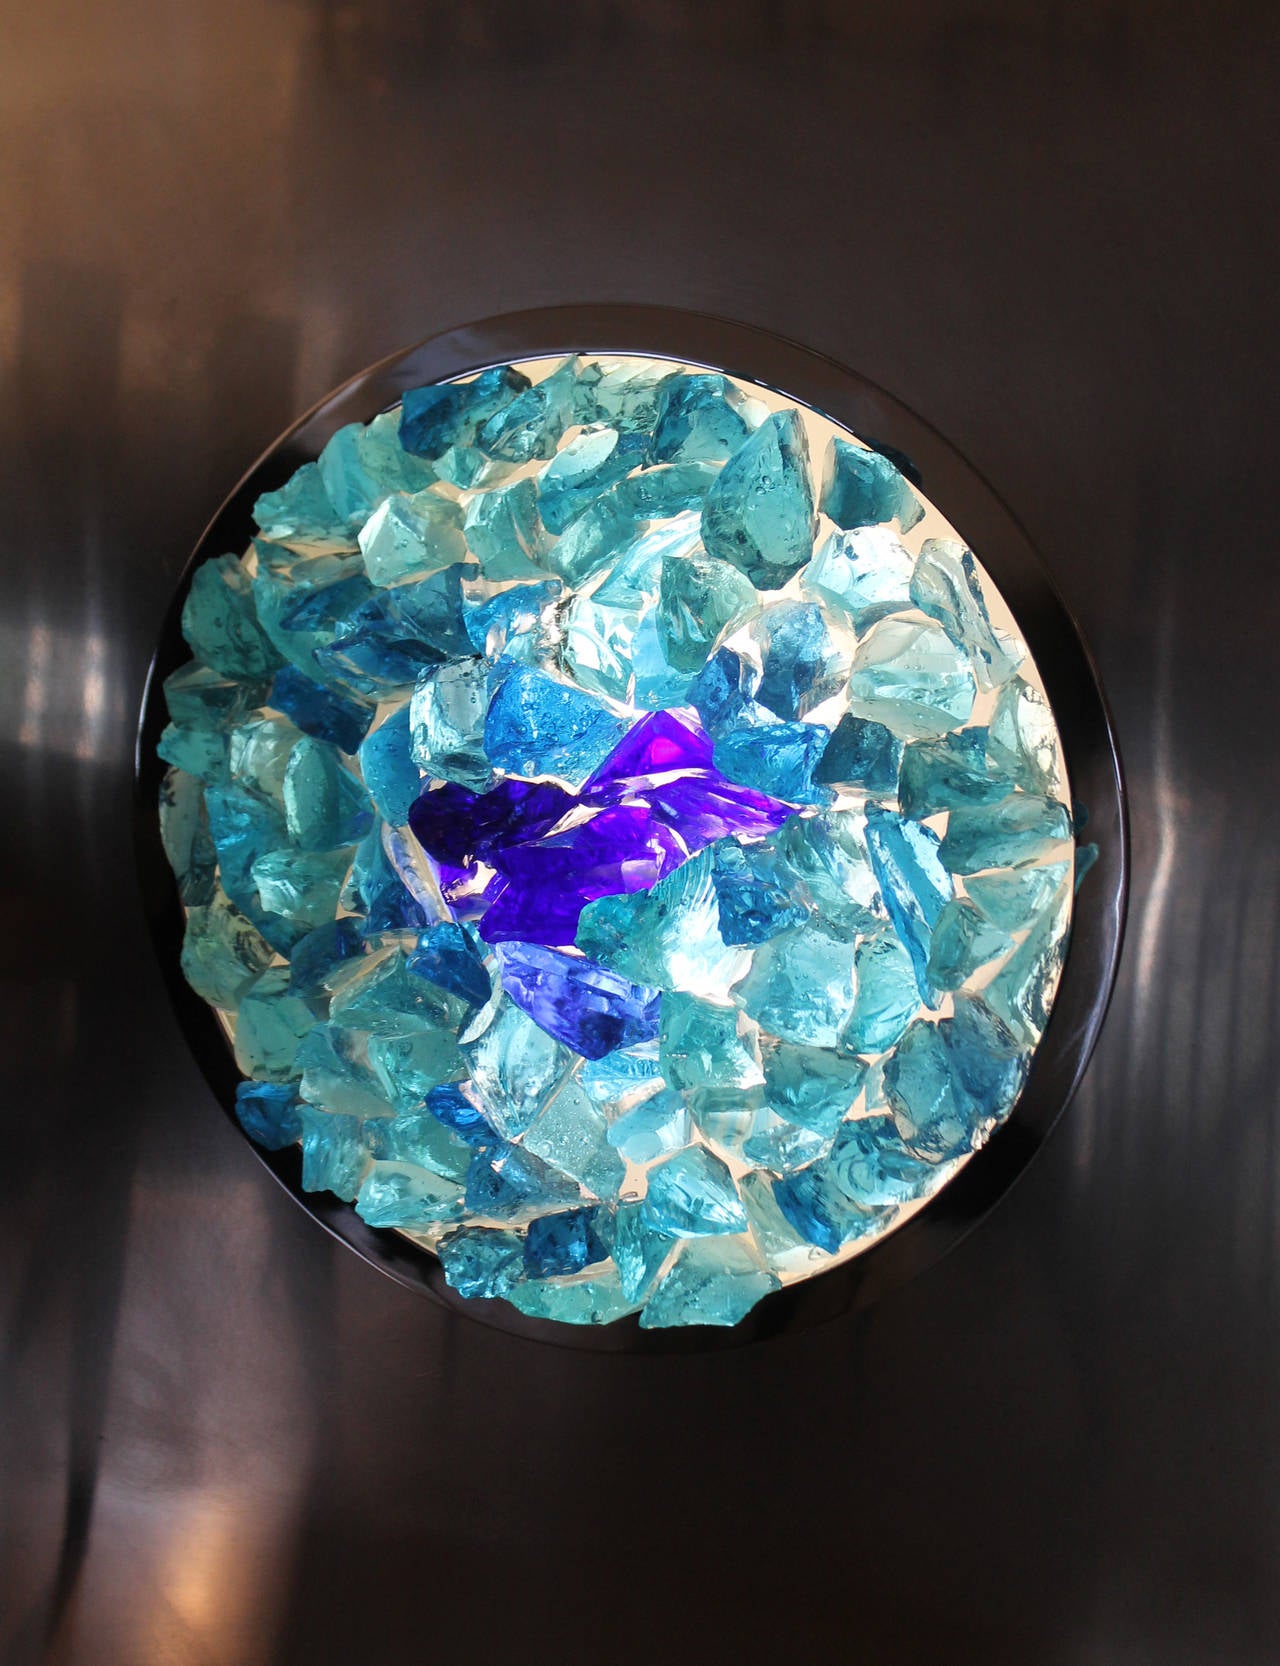 Striking work by Italian Artist Angelo Brotto whose works are also in the Museums of Modern Art of Rome and Venice. It is composed of a steel square with a blue glass gem filled circle at the center. The glass gems vary in color and are back lit.